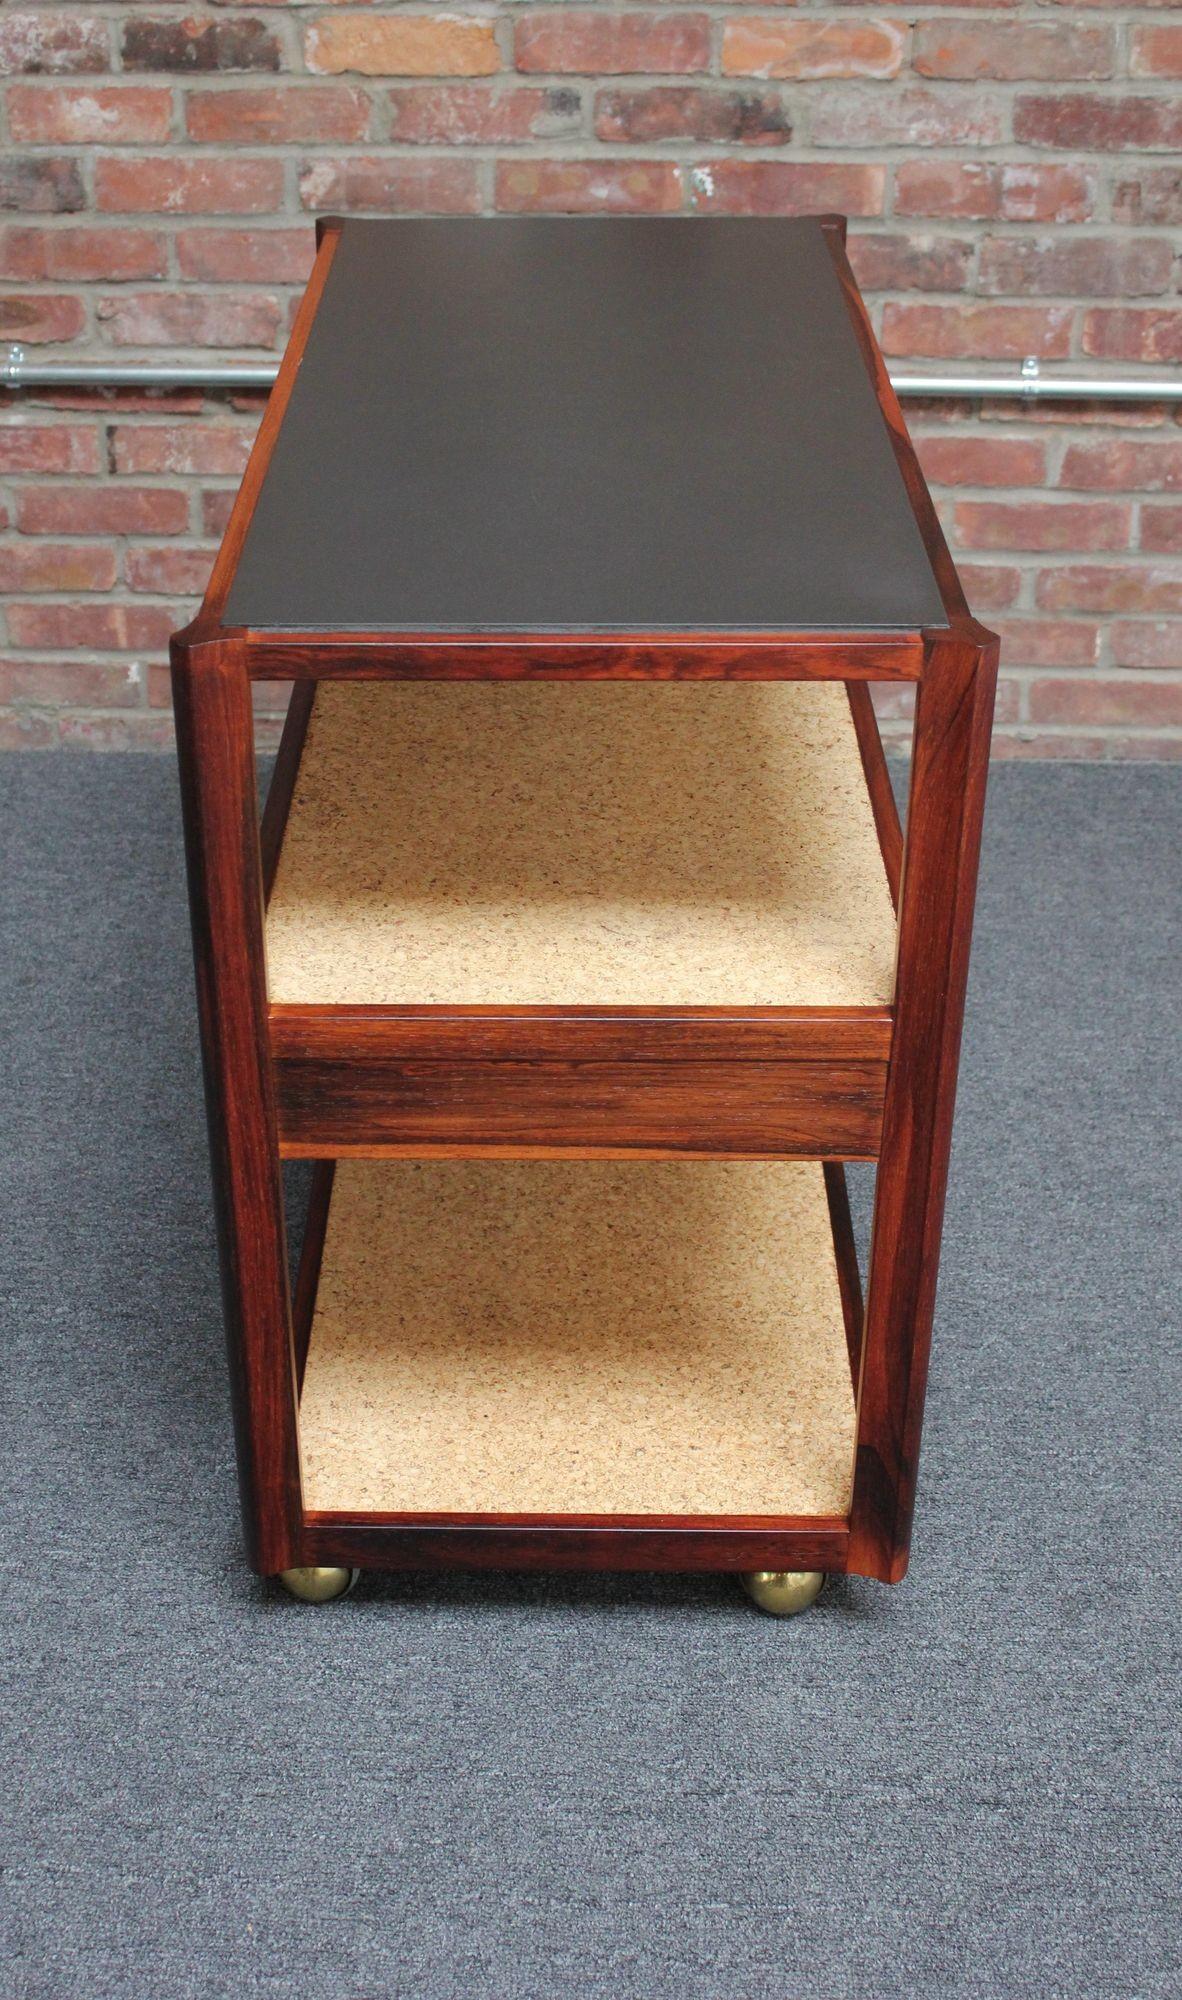 Mid-Century Modern Rosewood and Cork Bar Cart by Roger Sprunger for Dunbar For Sale 2